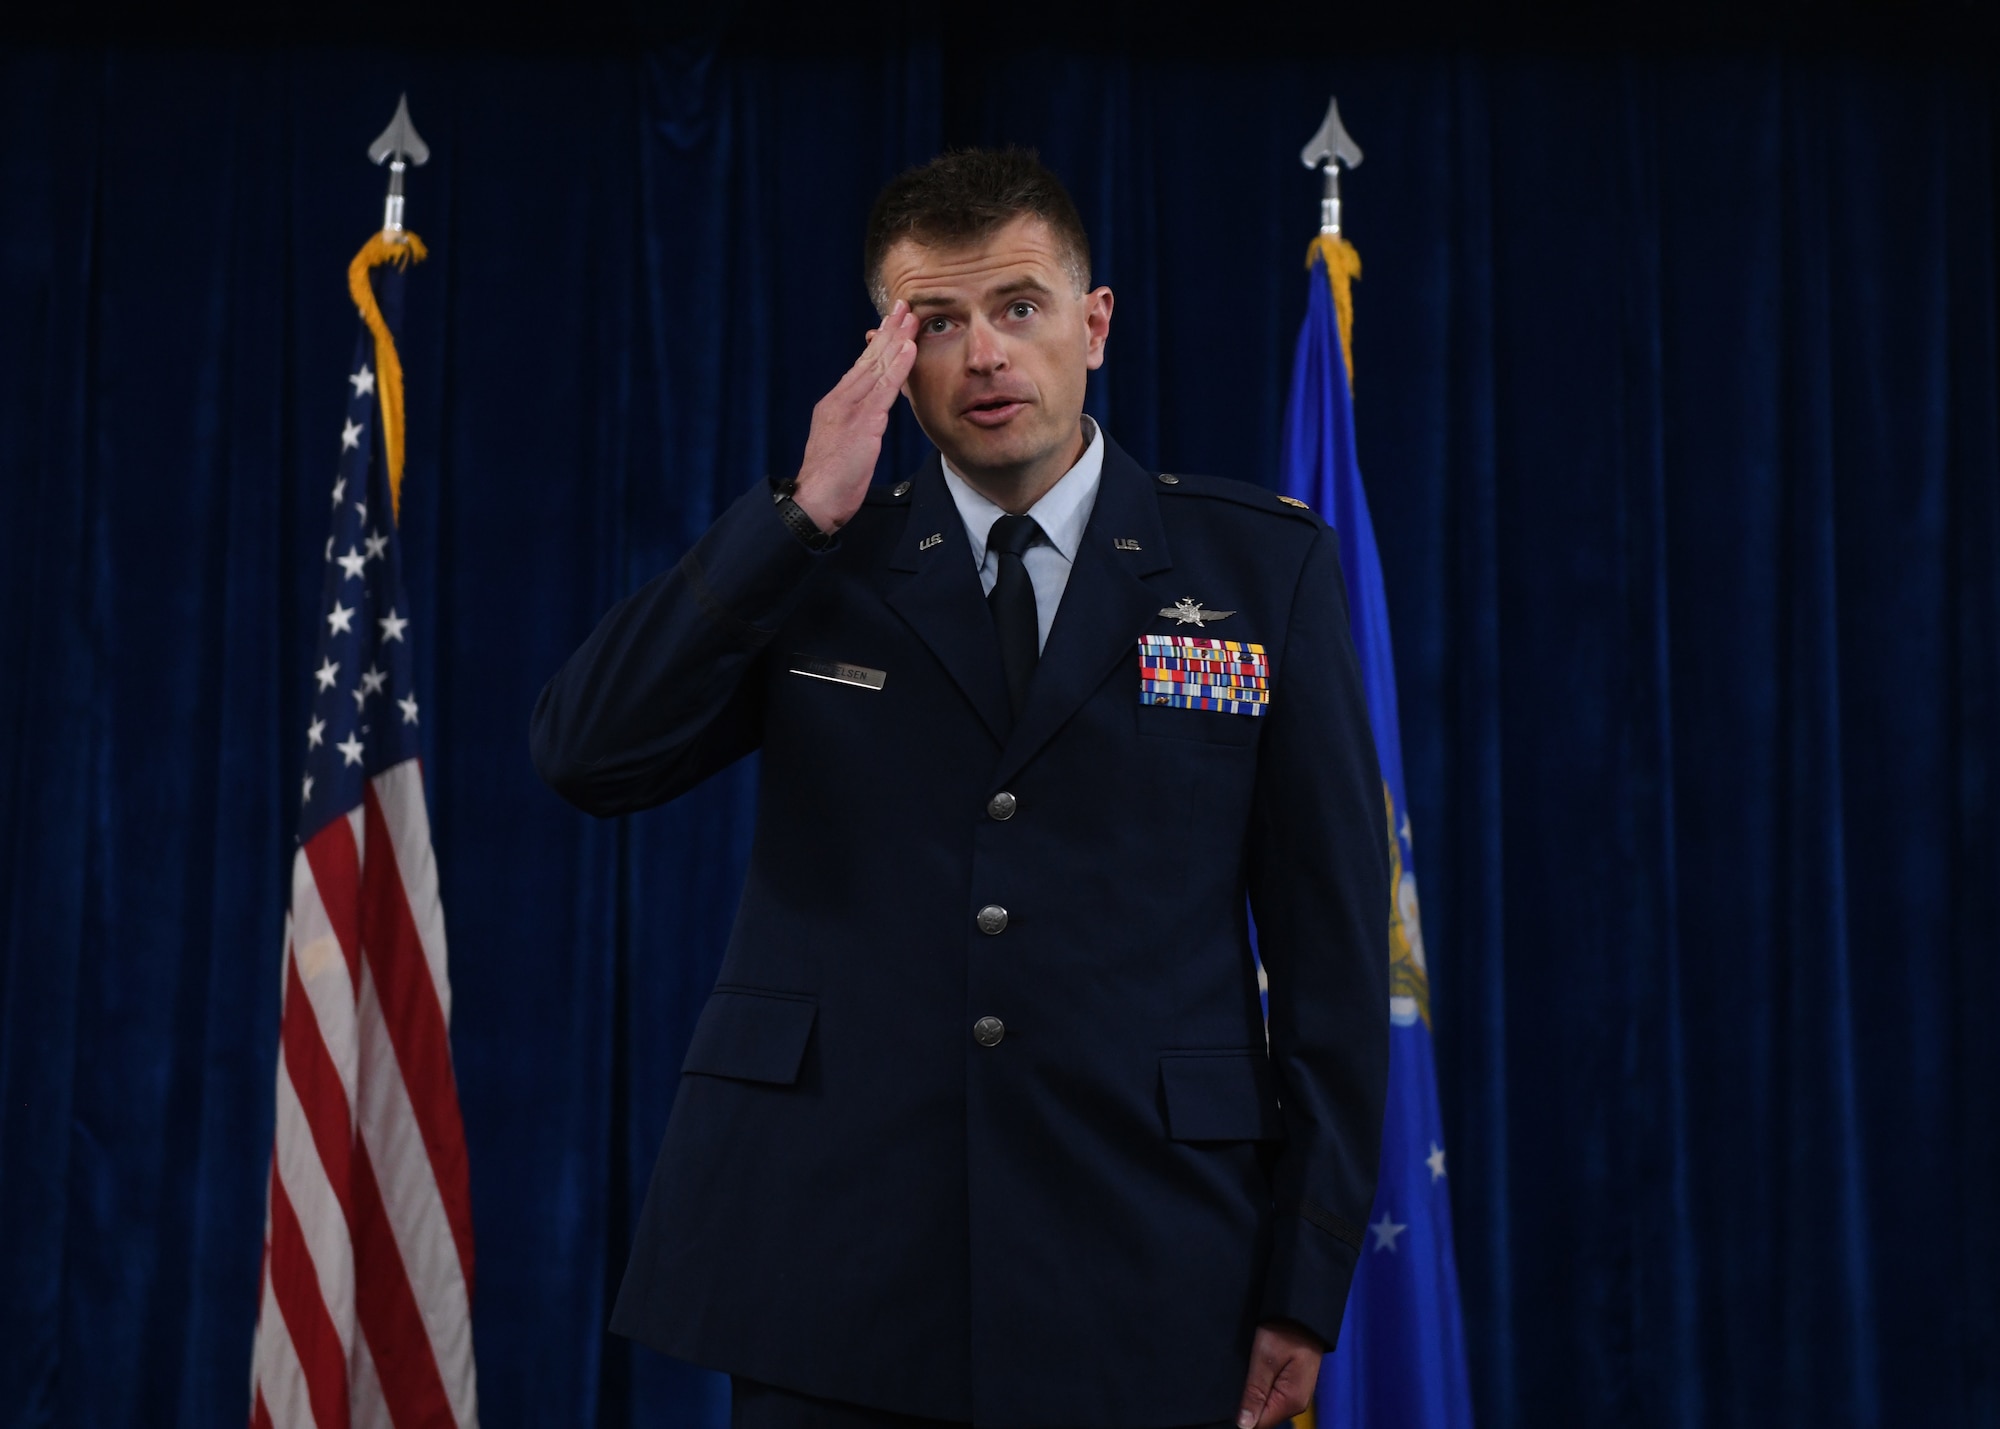 Maj. Jeffrey Mickelsen, the incoming commander of the 90th Communication Squadron, renders his first salute to the members of 90 CS during a change of command ceremony on F.E. Warren Air Force Base, June 13, 2022. The change of command ceremony signifies the transition of command from Lt. Col. Joseph Manning, the outgoing commander of 90 CS, to Mickelsen. (U.S. Air Force photo by Airman 1st Class Darius Frazier.)